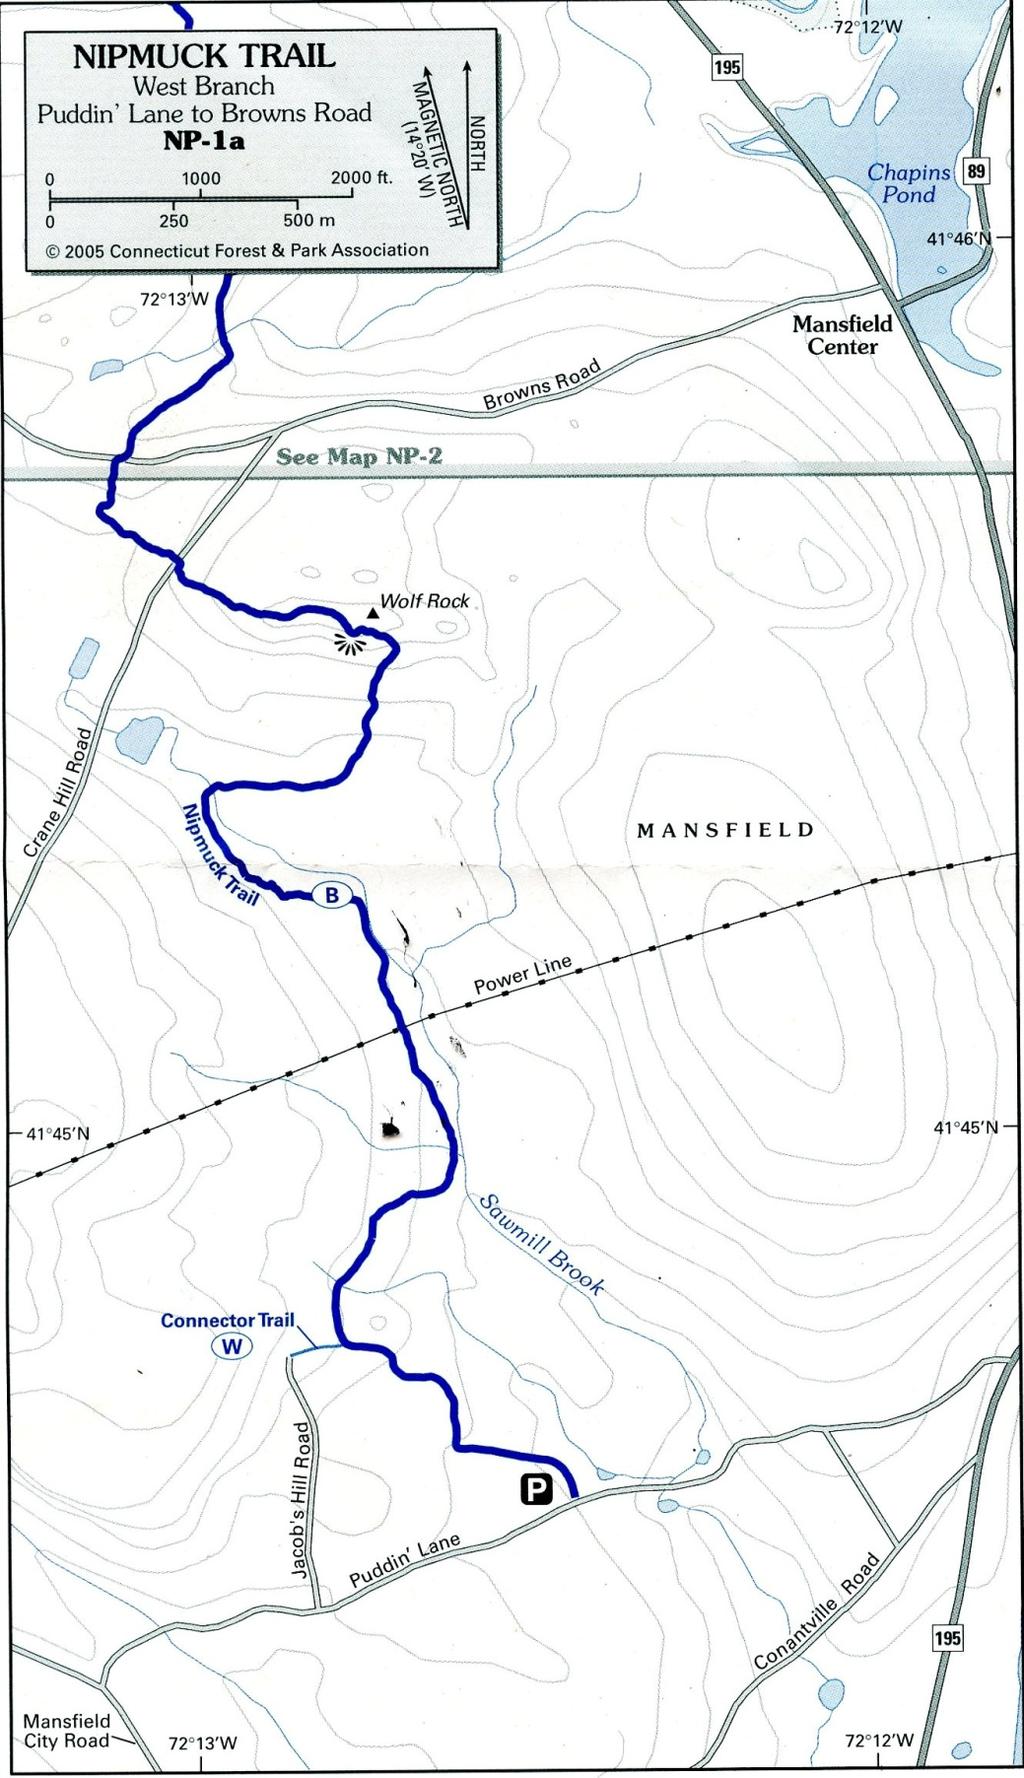 Figure 3-1: Nipmuck Trail, West Branch: Location along CL&P ROW, Town of